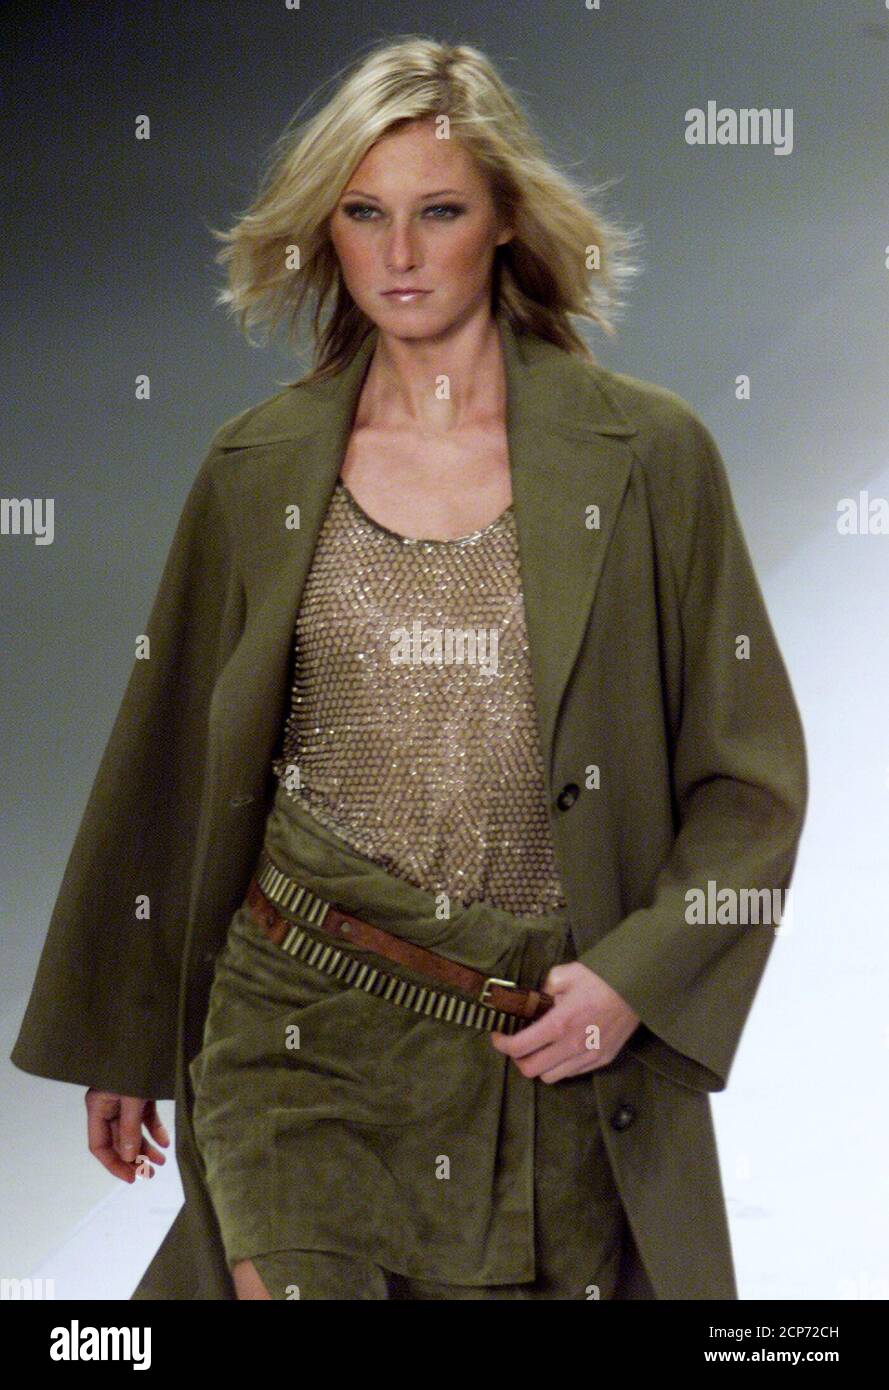 A model for French fashion house Celine wears a green jacket and skirt designed American Michael Kors as part of his Spring/Summer 2001 ready-to-wear collection October 10, 2000. The Paris ready-to